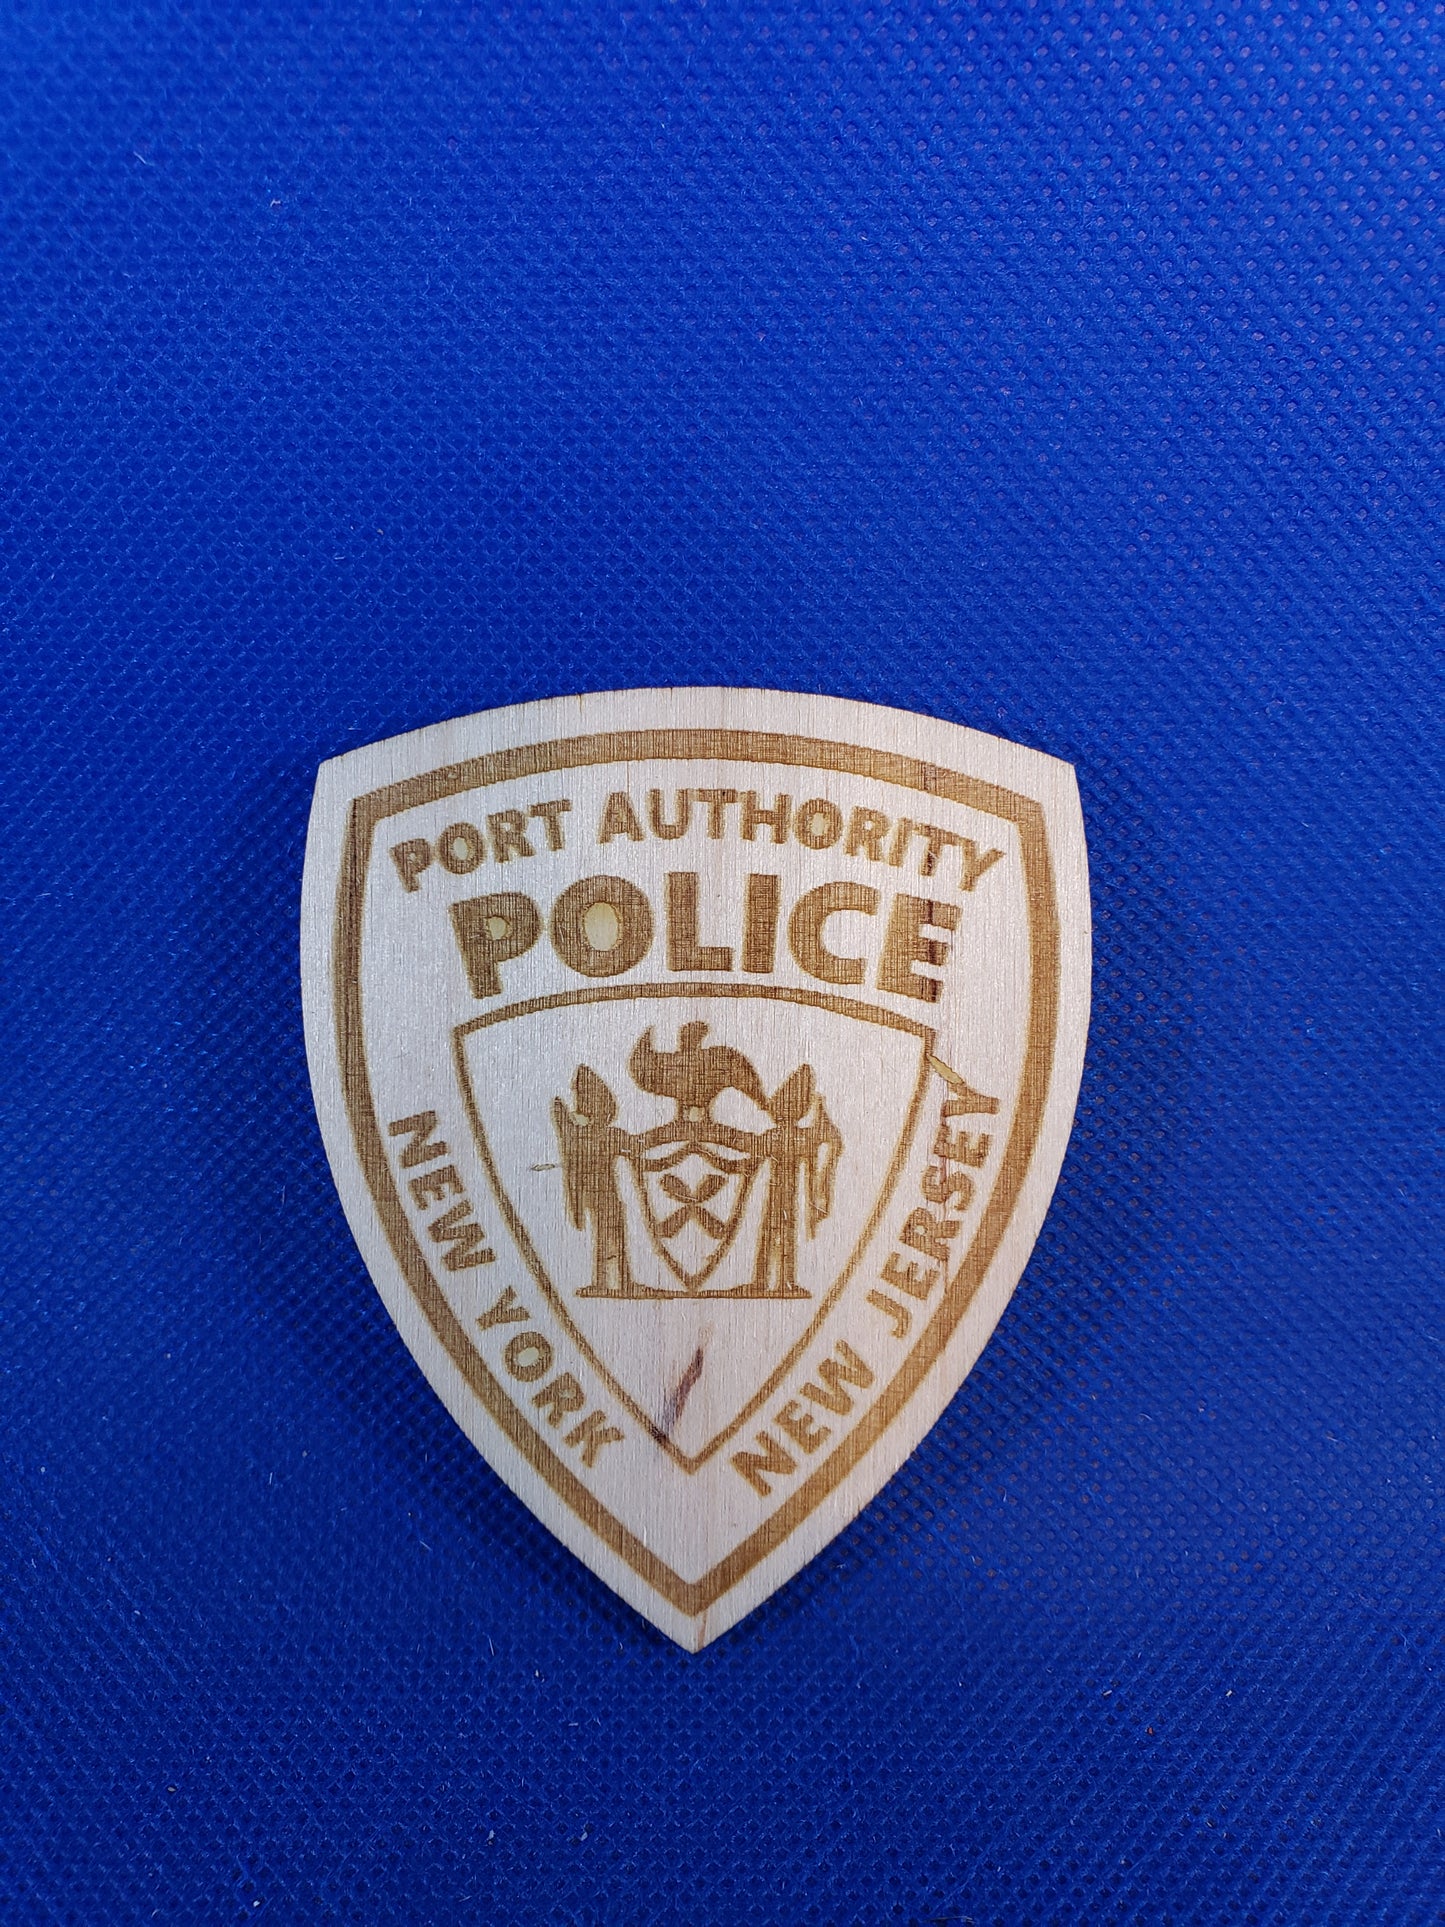 Port Authority Police - Laser cut natural wooden blanks